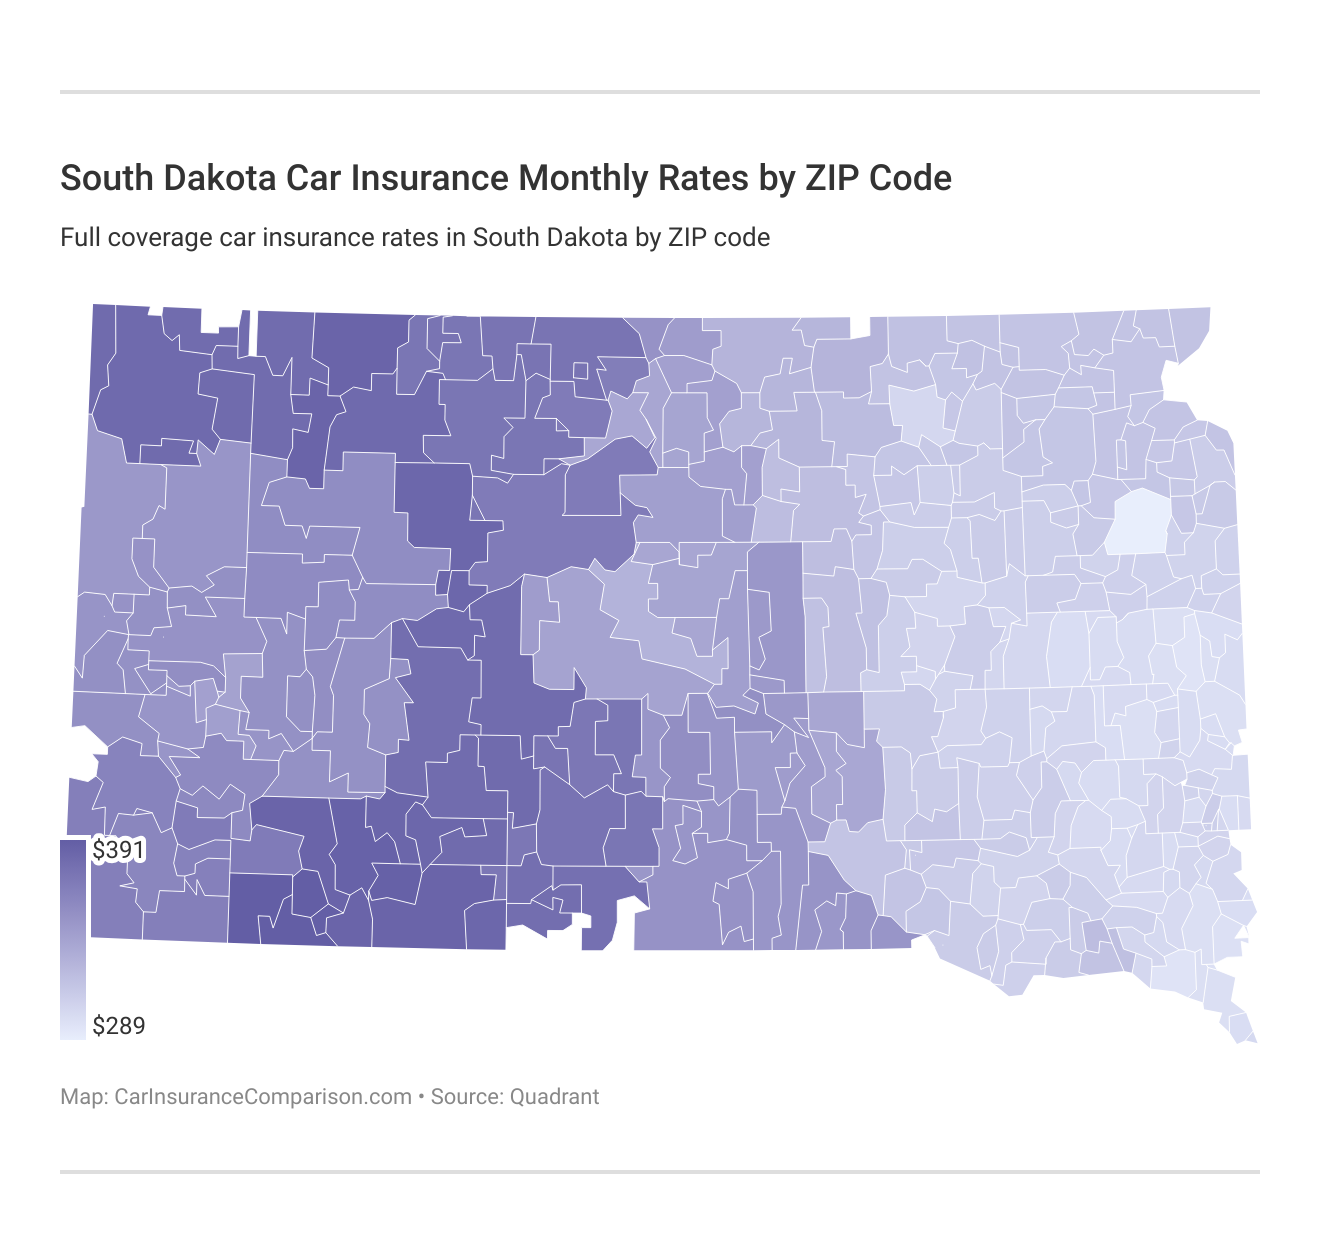 <h3>South Dakota Car Insurance Monthly Rates by ZIP Code</h3>